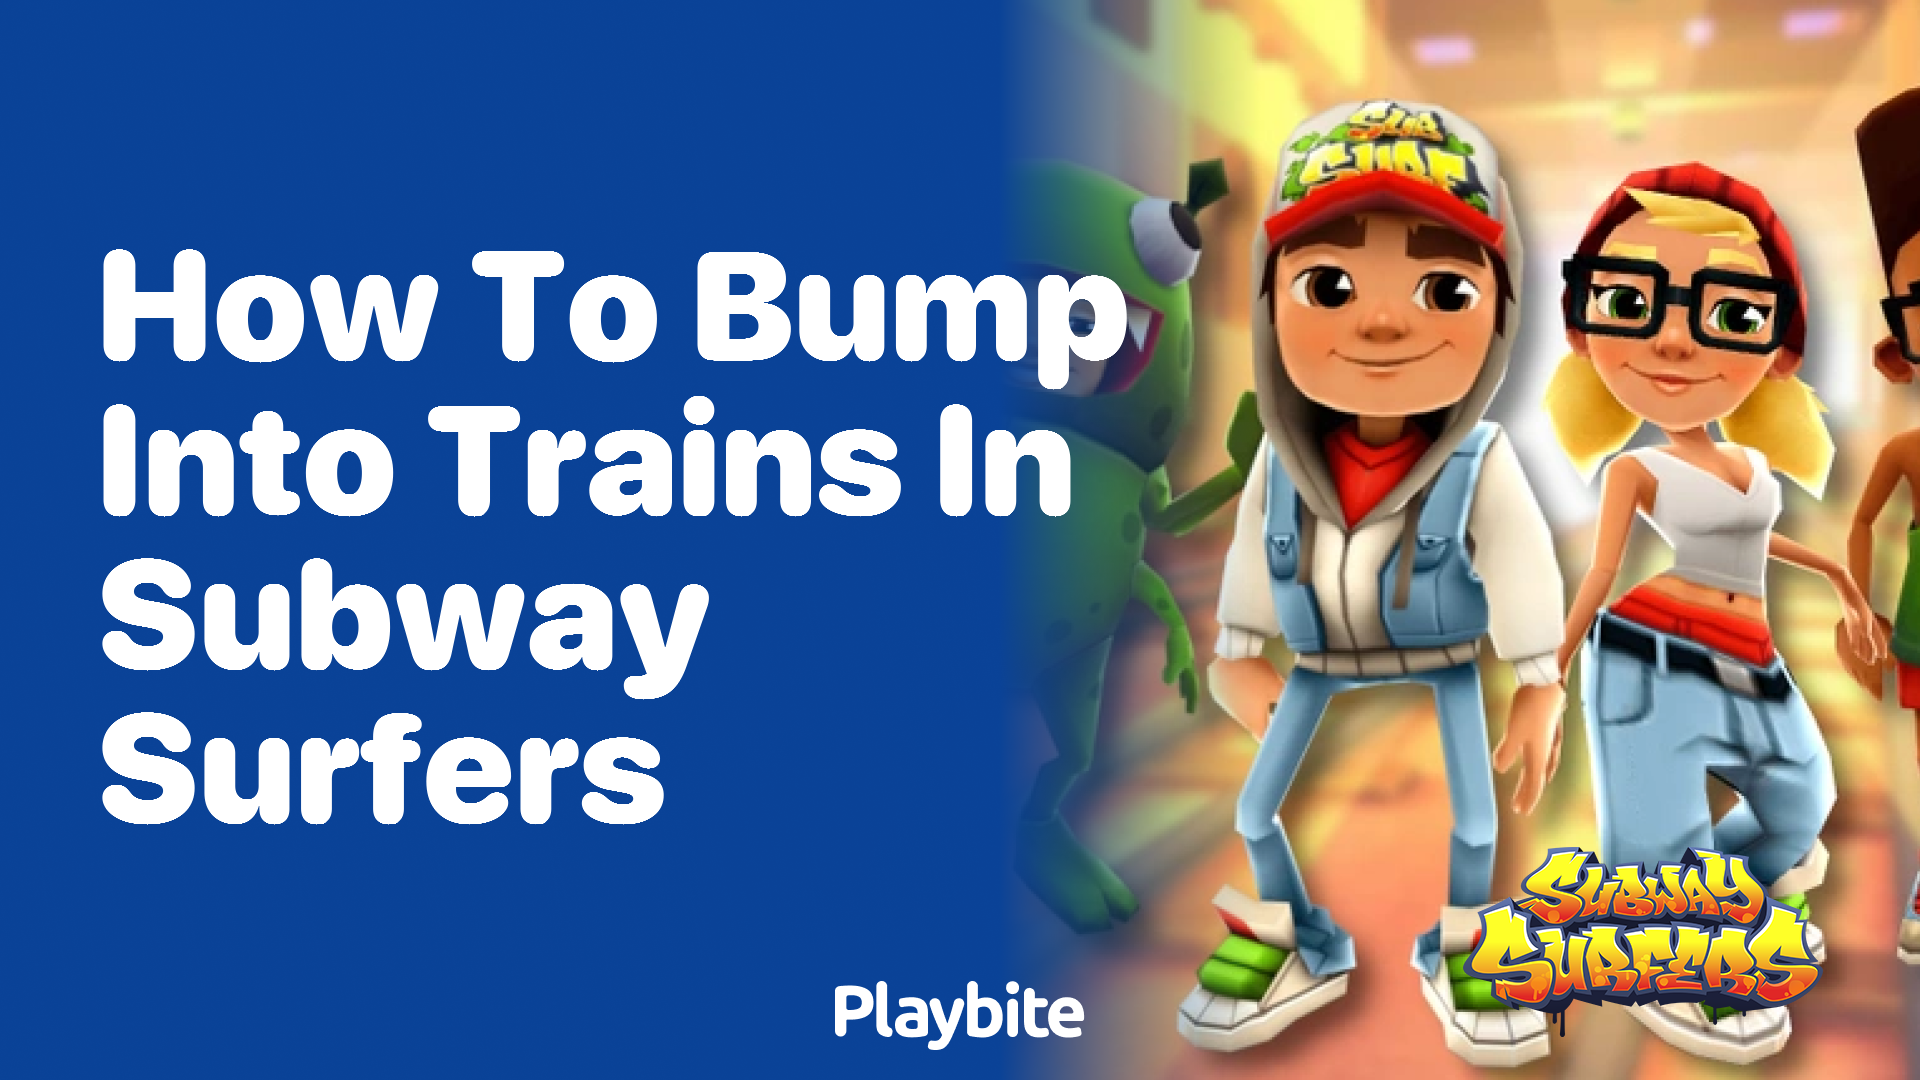 How to bump into trains in Subway Surfers